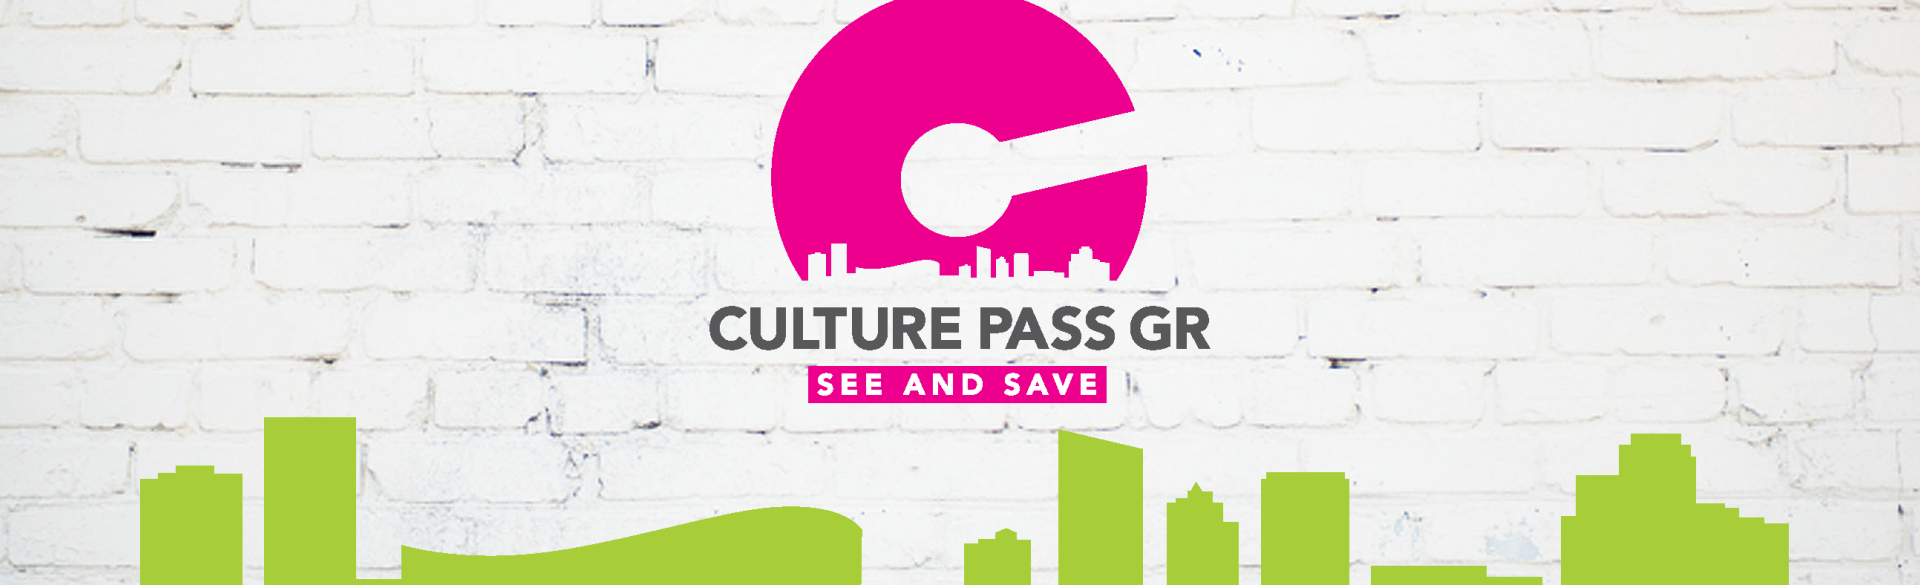 Culture Pass GR - See and Save!